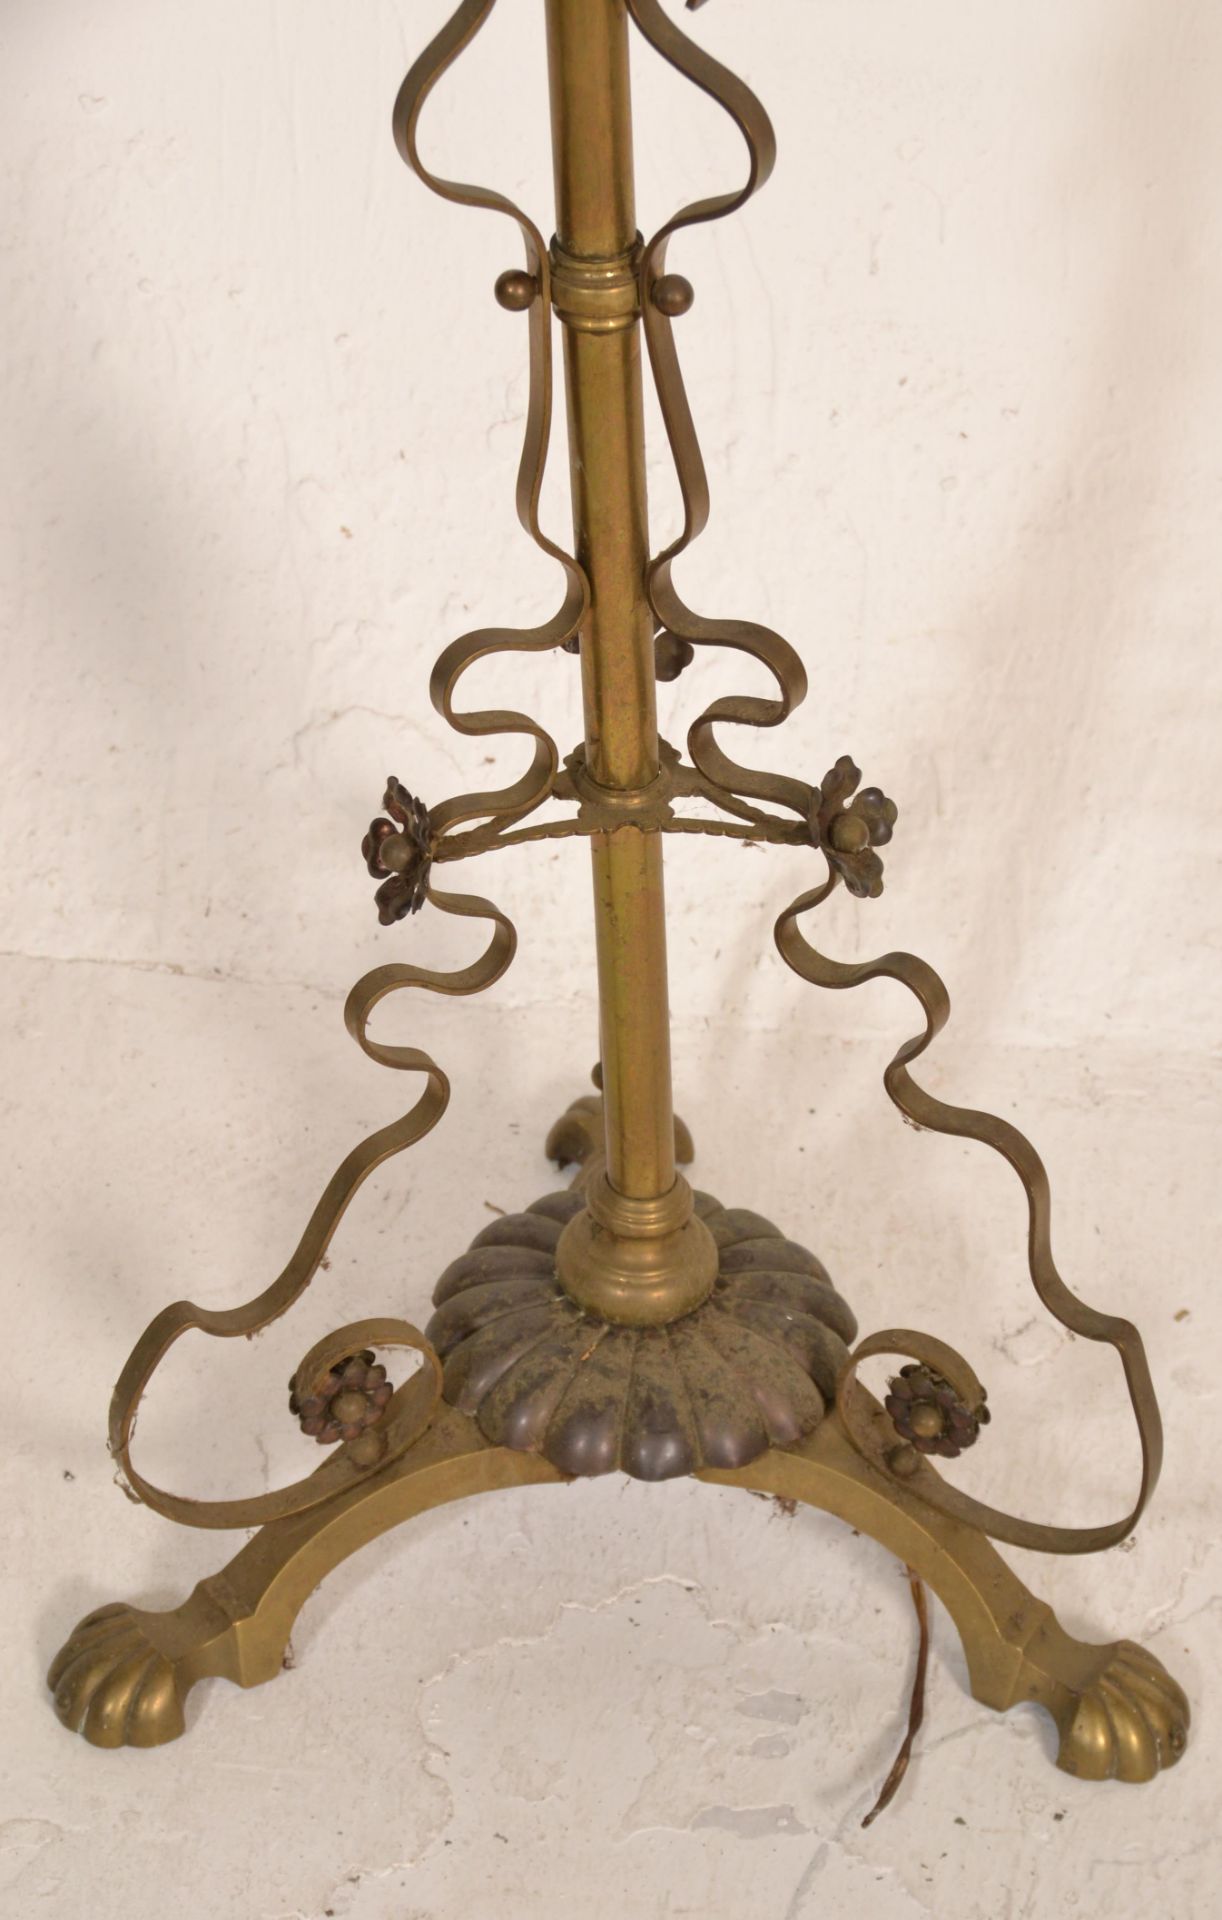 A vintage early 20th Century converted to electric brass floor standing lamp having a decorative - Bild 4 aus 4